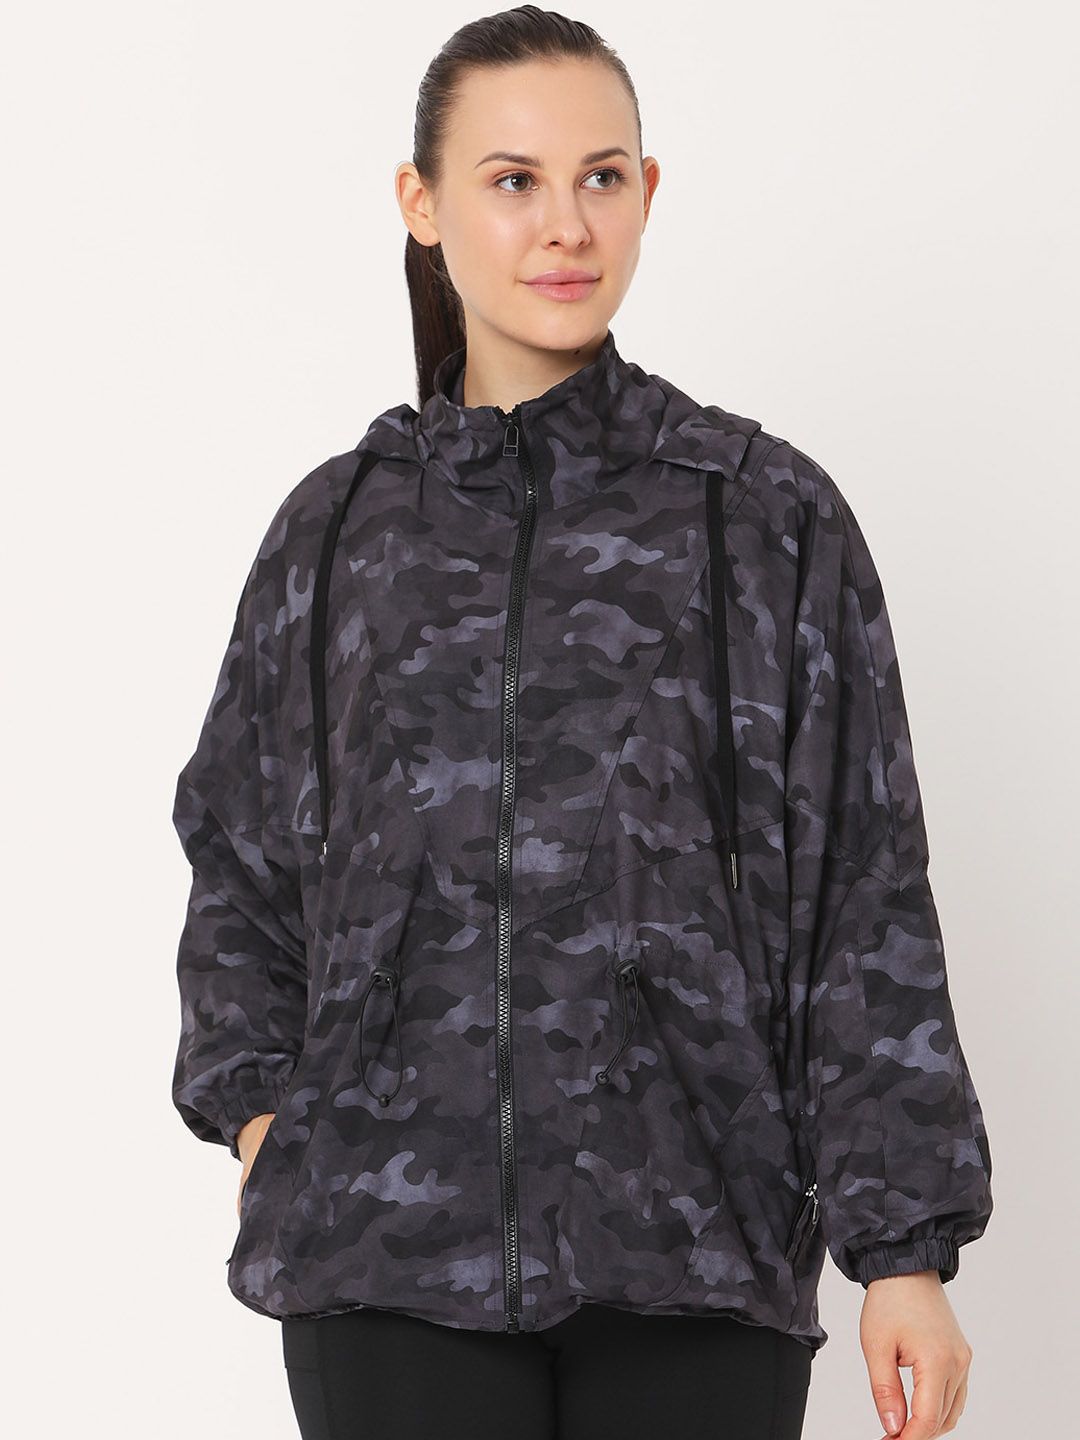 Silvertraq Women Black Camouflage Printed Longline Sporty Jacket Price in India